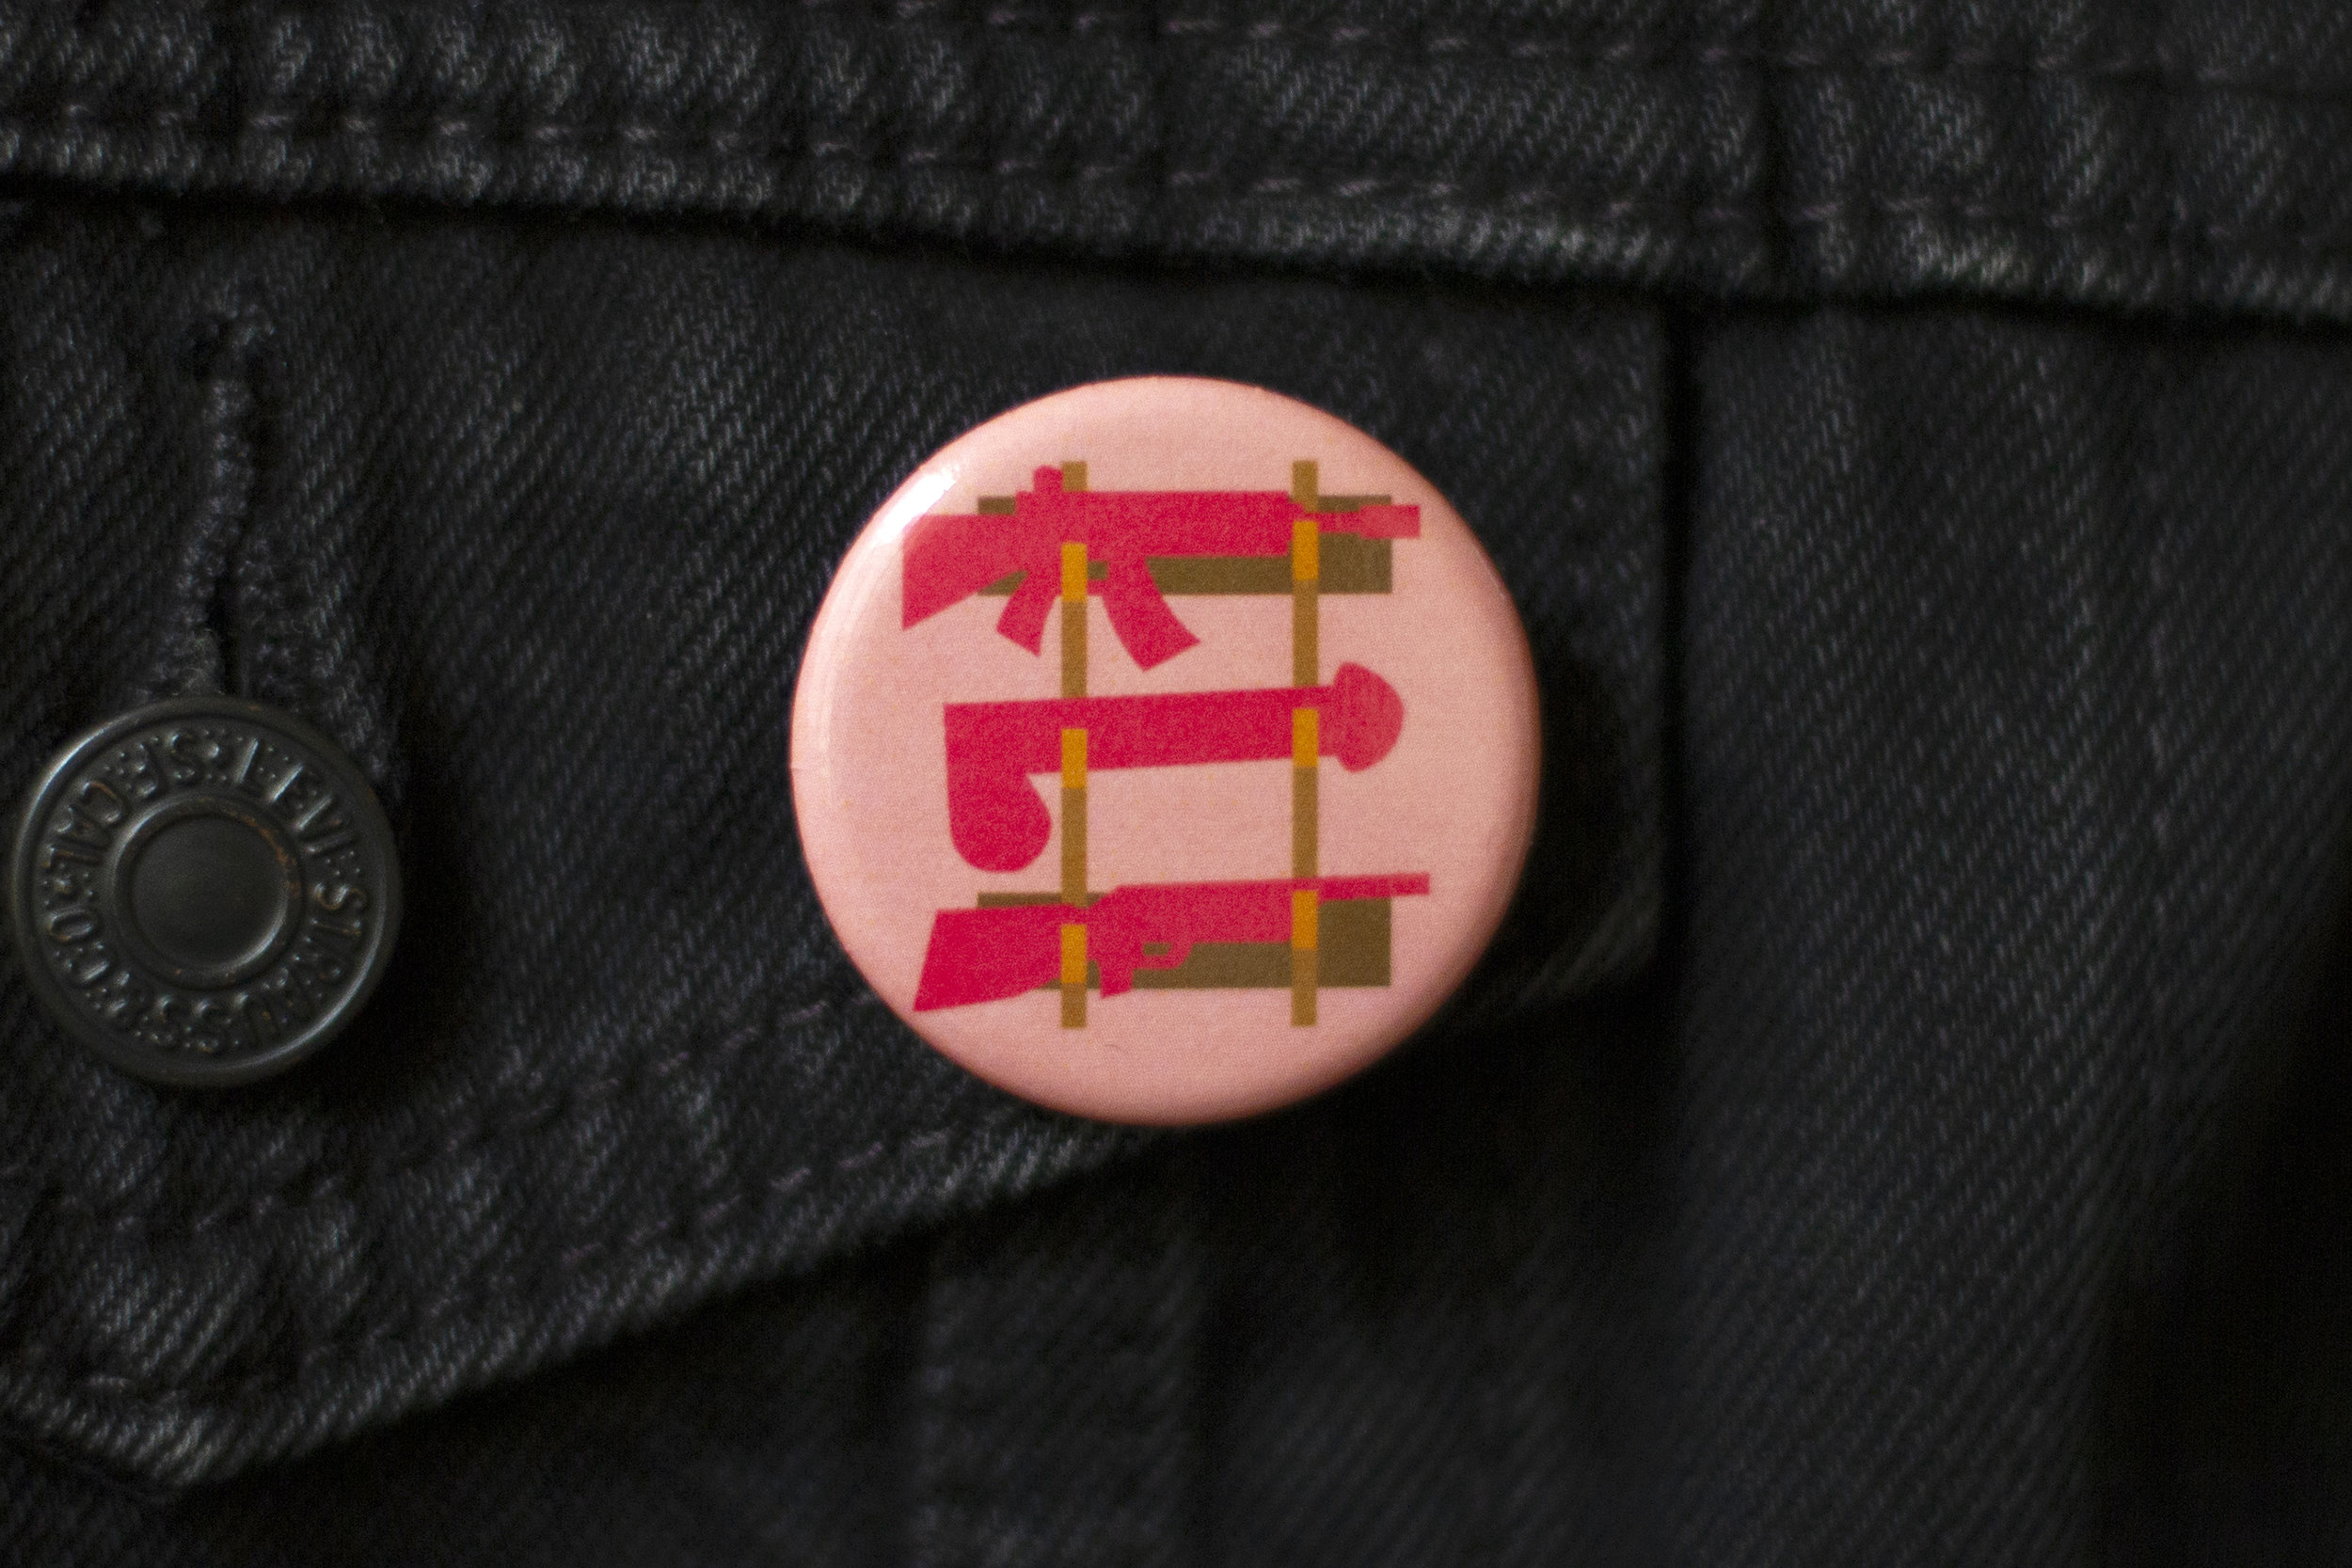 Implied Threat art button by CockBloq pinned on a denim jacket